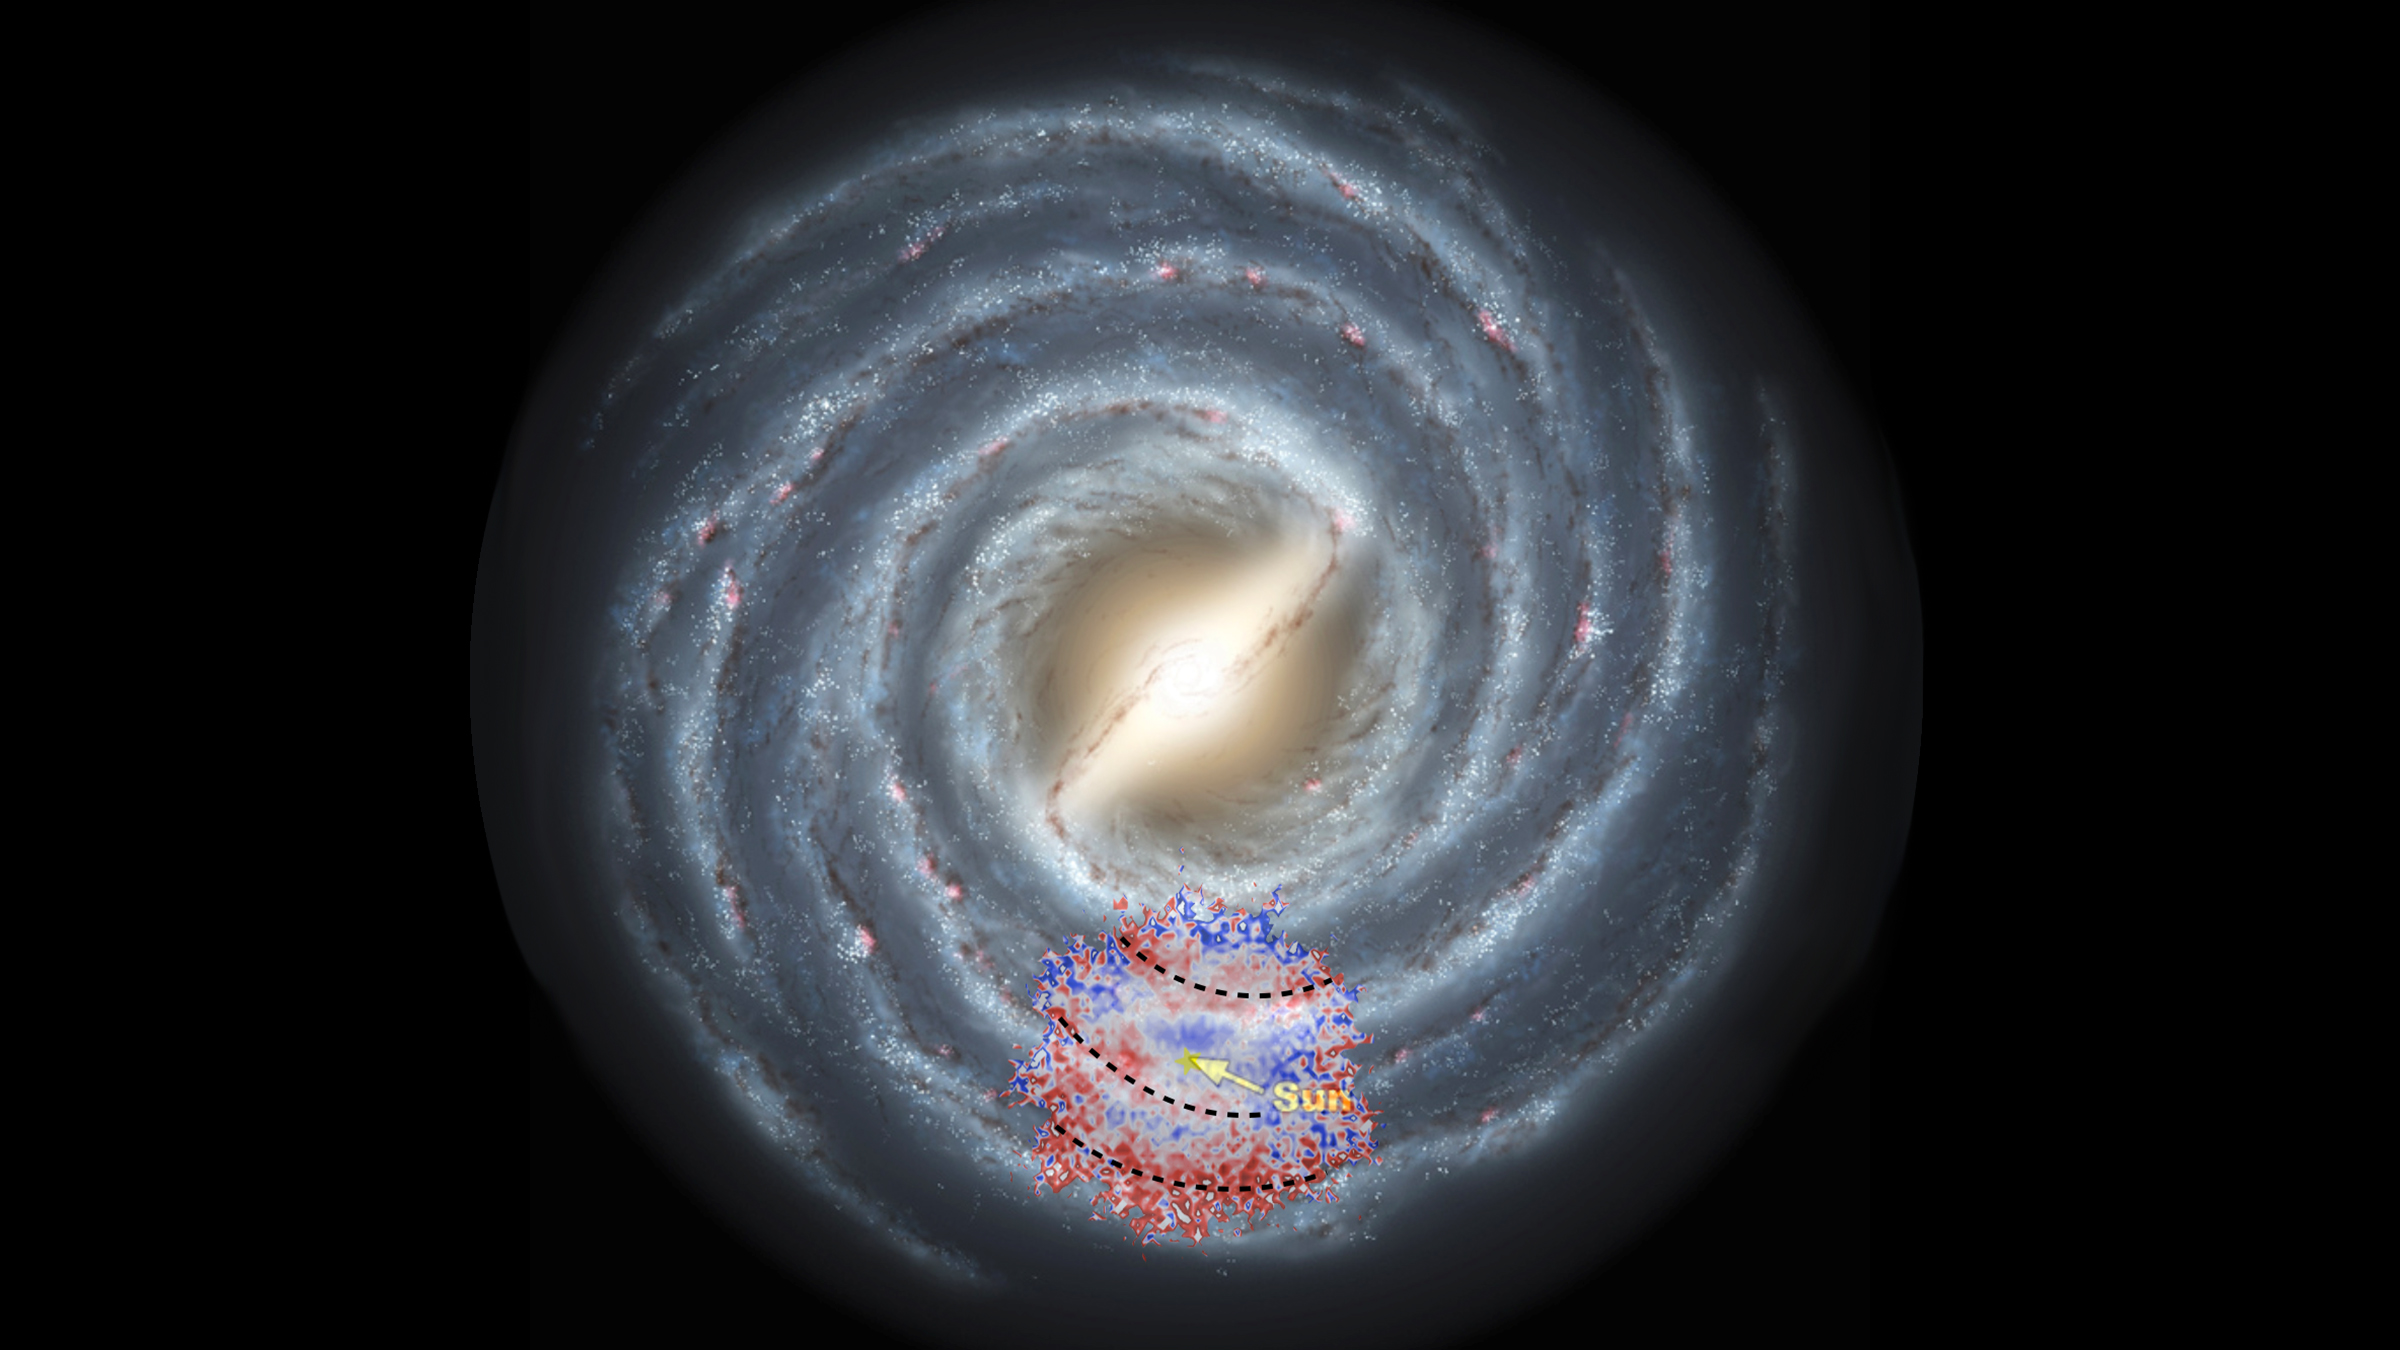 A spiral galaxy floats in the black background of space with red and blue dots sprinkled over one section